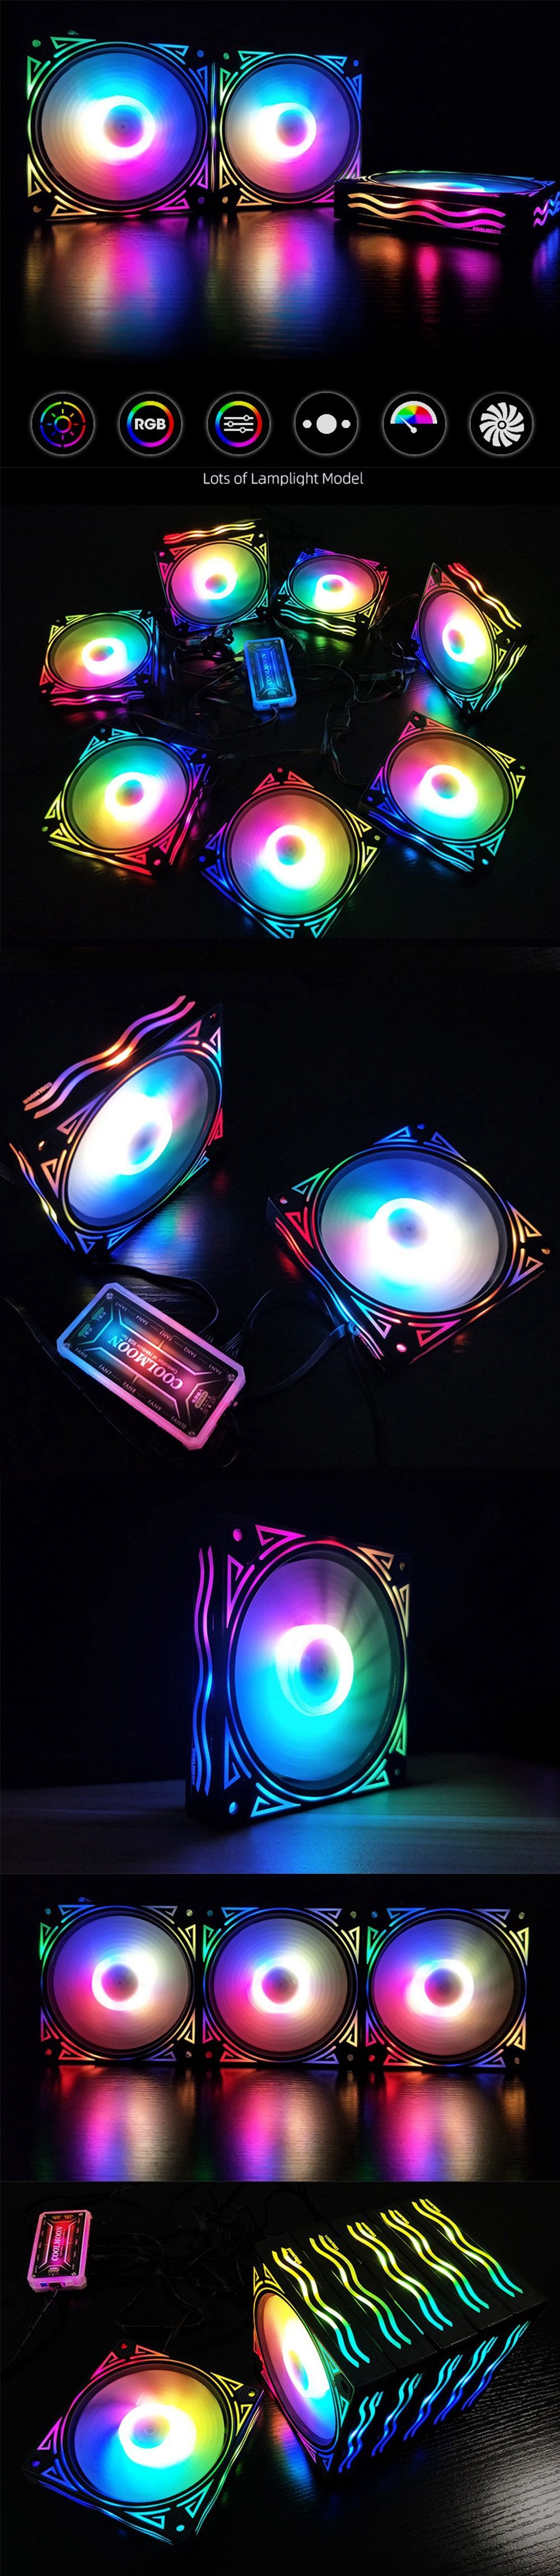 Coolmoon-BILLOW-6PCS-12cm-Multilayer-Backlit-RGB-CPU-Cooling-Fan-Computer-PC-Case-with-the-RF-Wirele-1580307